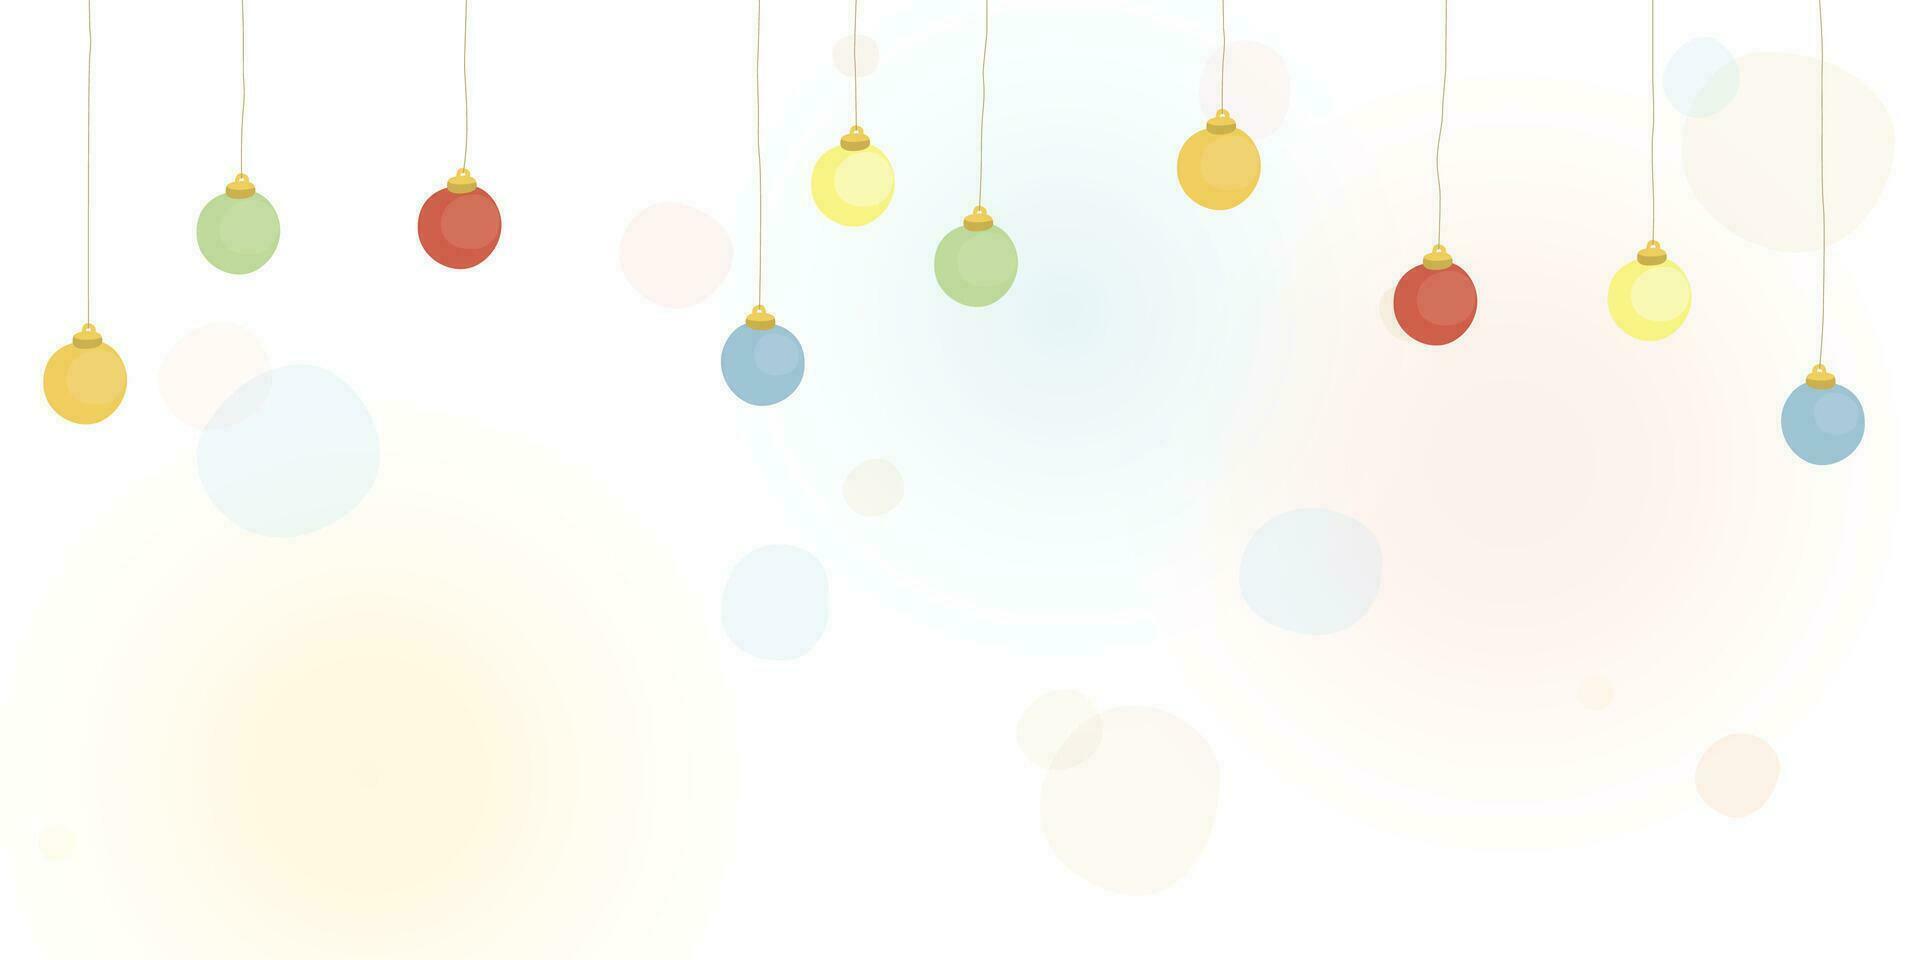 Colorful hanging evening balls with blurred background vector illustration childish style. Party background doodle lines template have blank space.